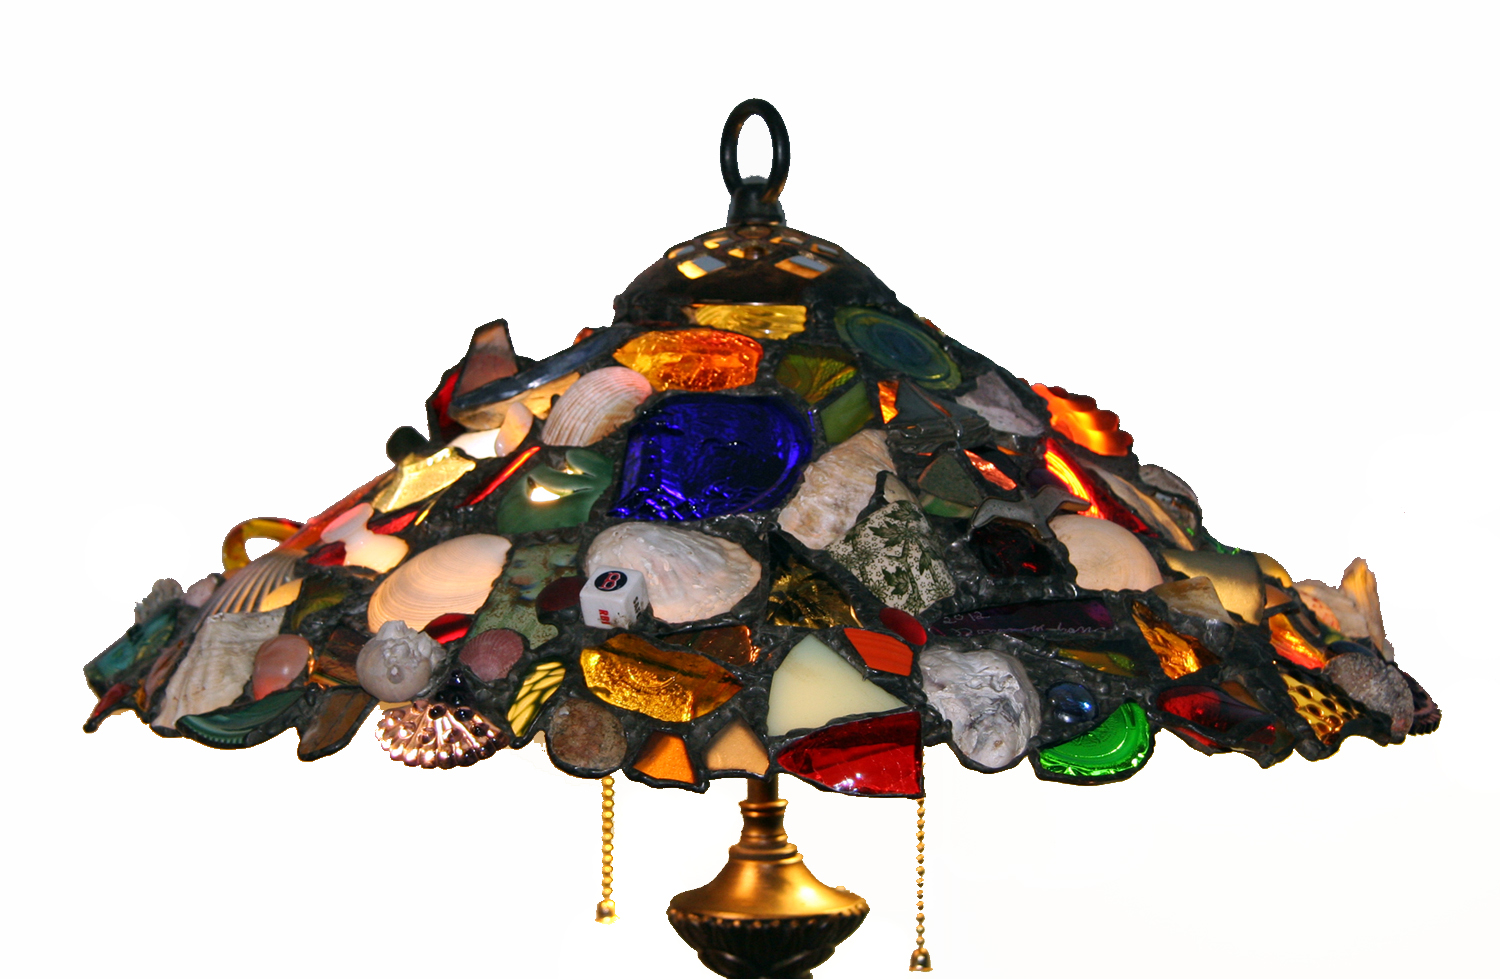 COMMISSIONED LAMP SHADE ~ 18" diam. Repurposed glass, shells, pottery, and client's treasures